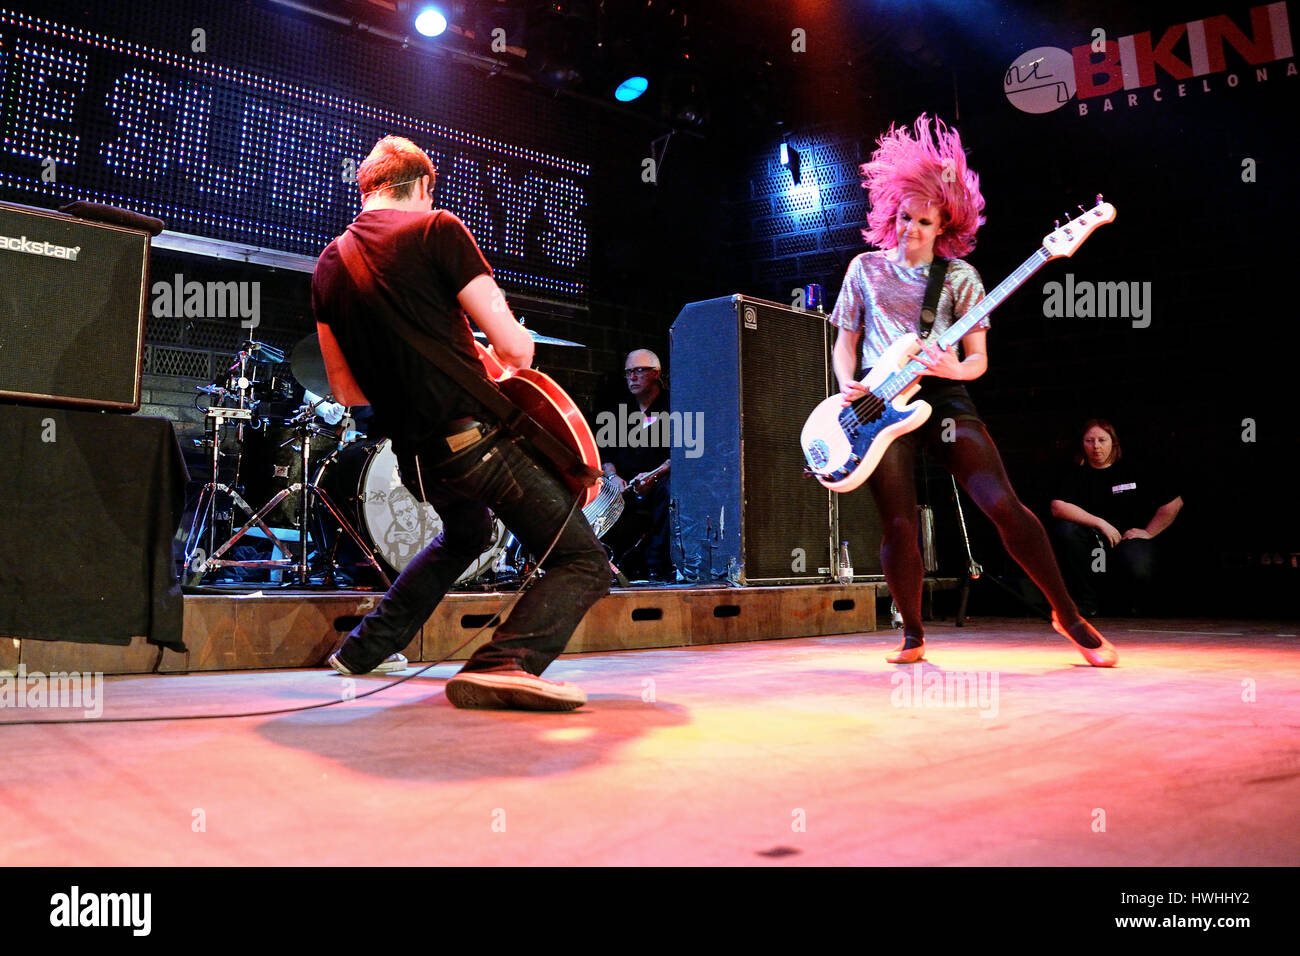 BARCELONA - MAR 18: The Subways (rock band) performs at Bikini stage on March 18, 2015 in Barcelona, Spain. Stock Photo